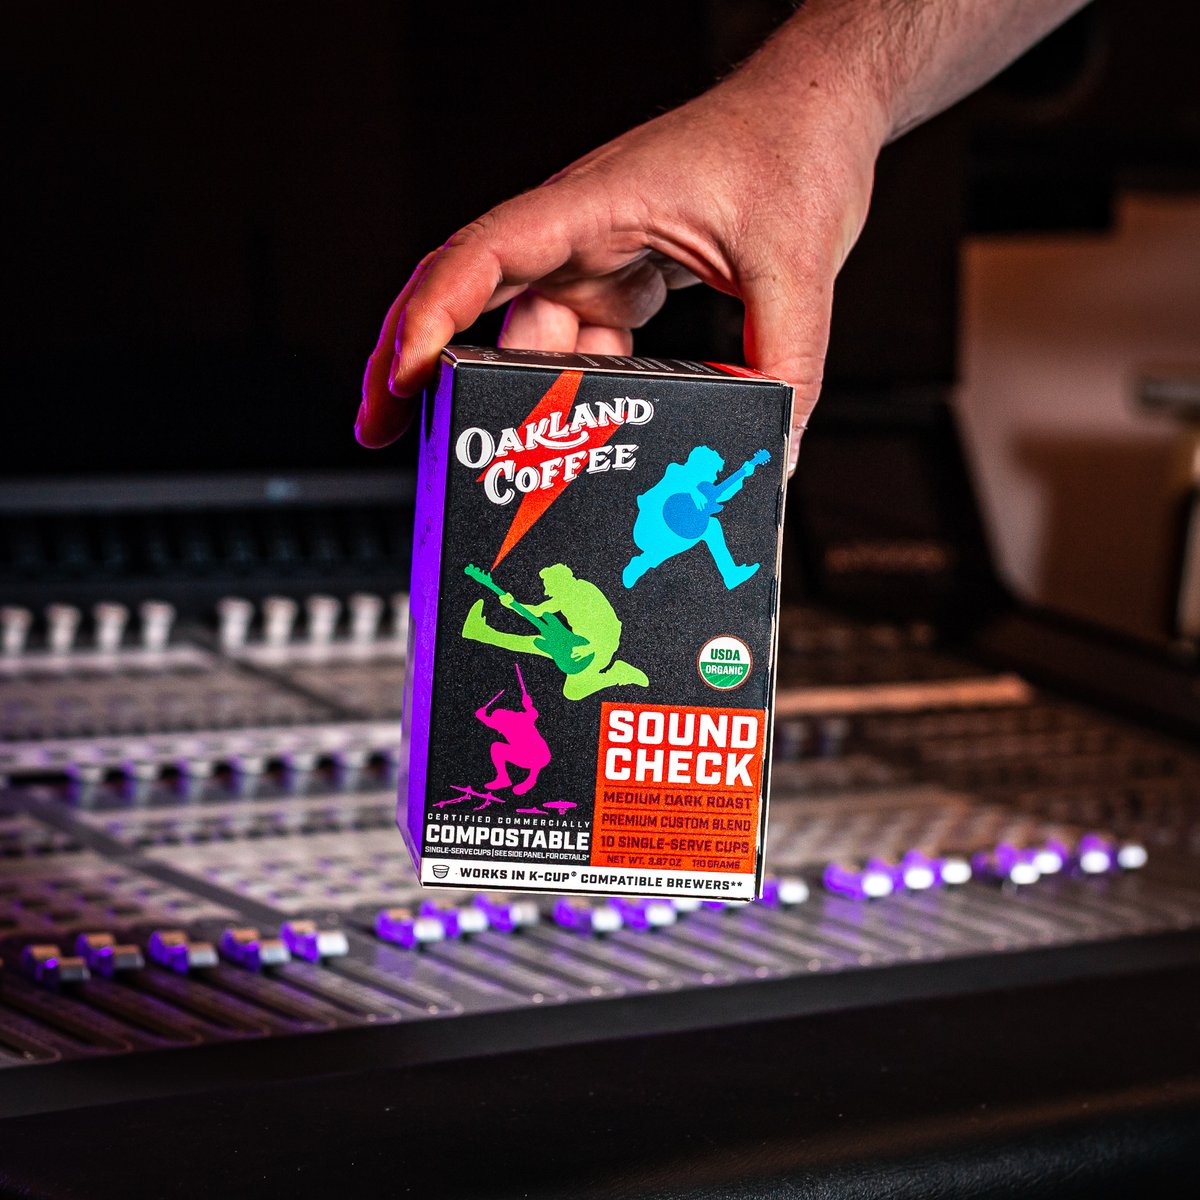 Our Soundcheck Blend is the perfect way to wake up your creativity! Bold, smooth, and damn delicious. #OaklandCoffee #SoundcheckBlend #CaffeinateYourCreativity